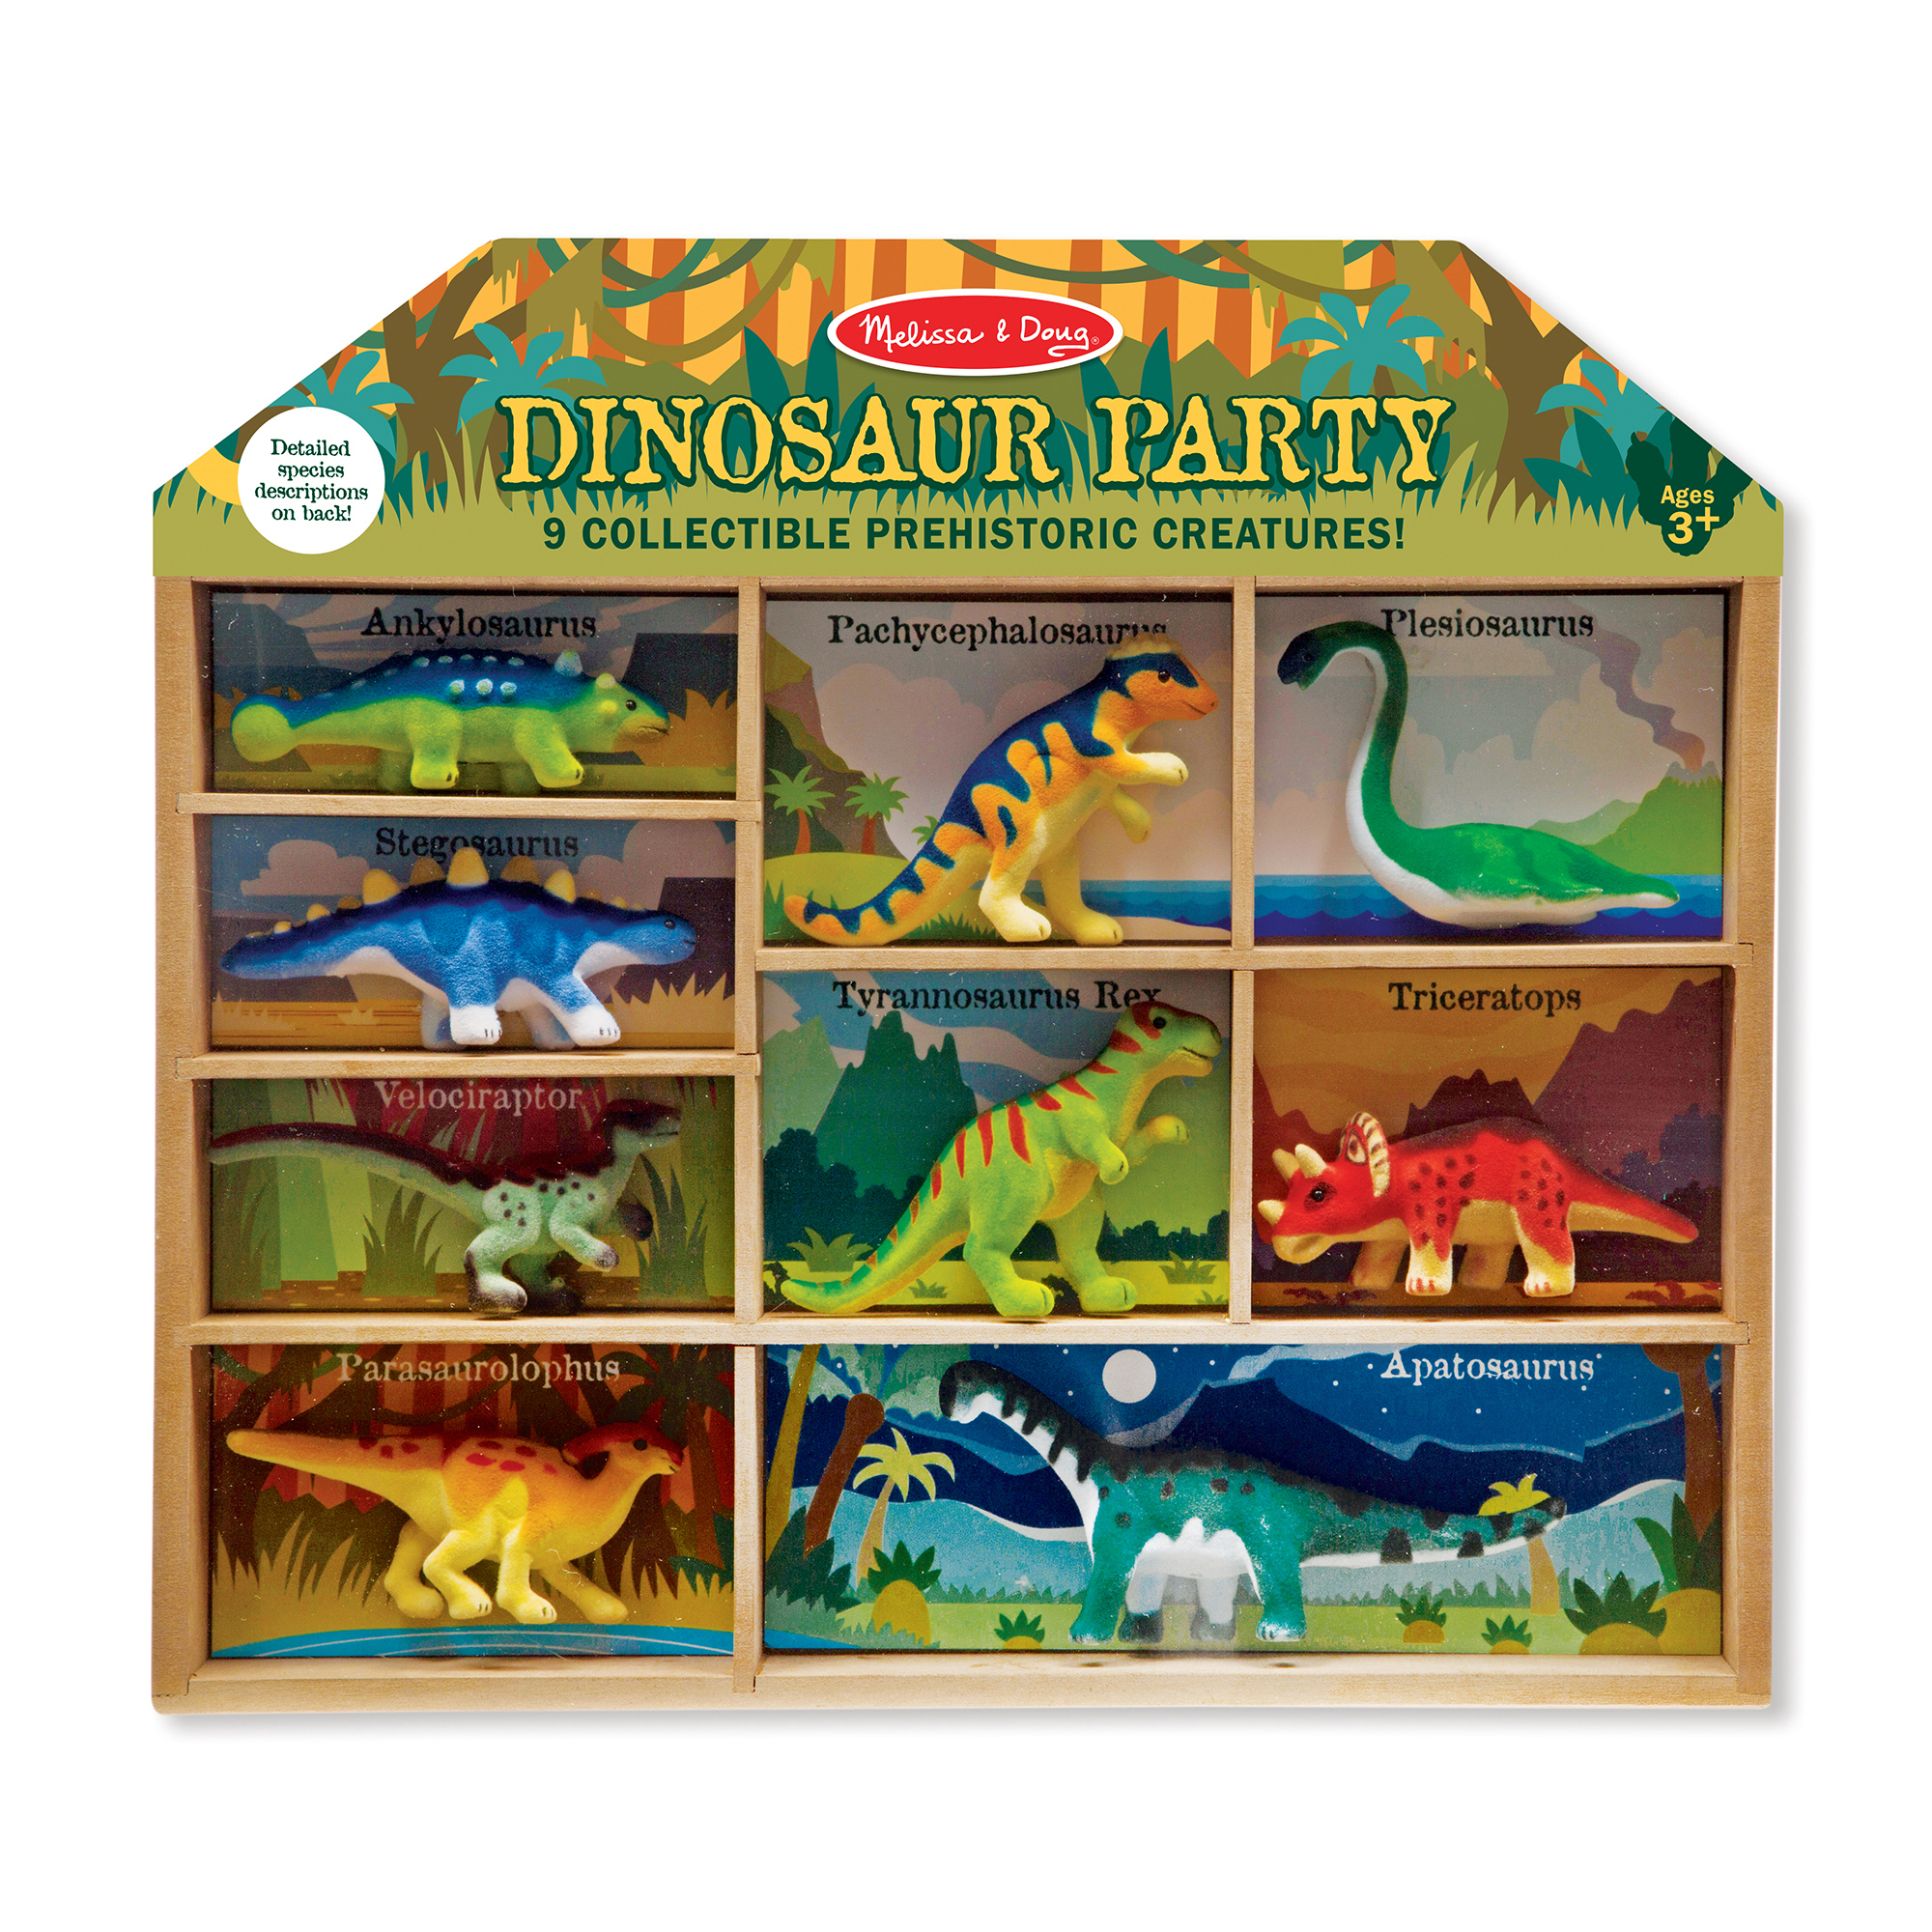 Dinosaur Party Play Set - 9 Collectible Miniature Dinosaurs In A Case